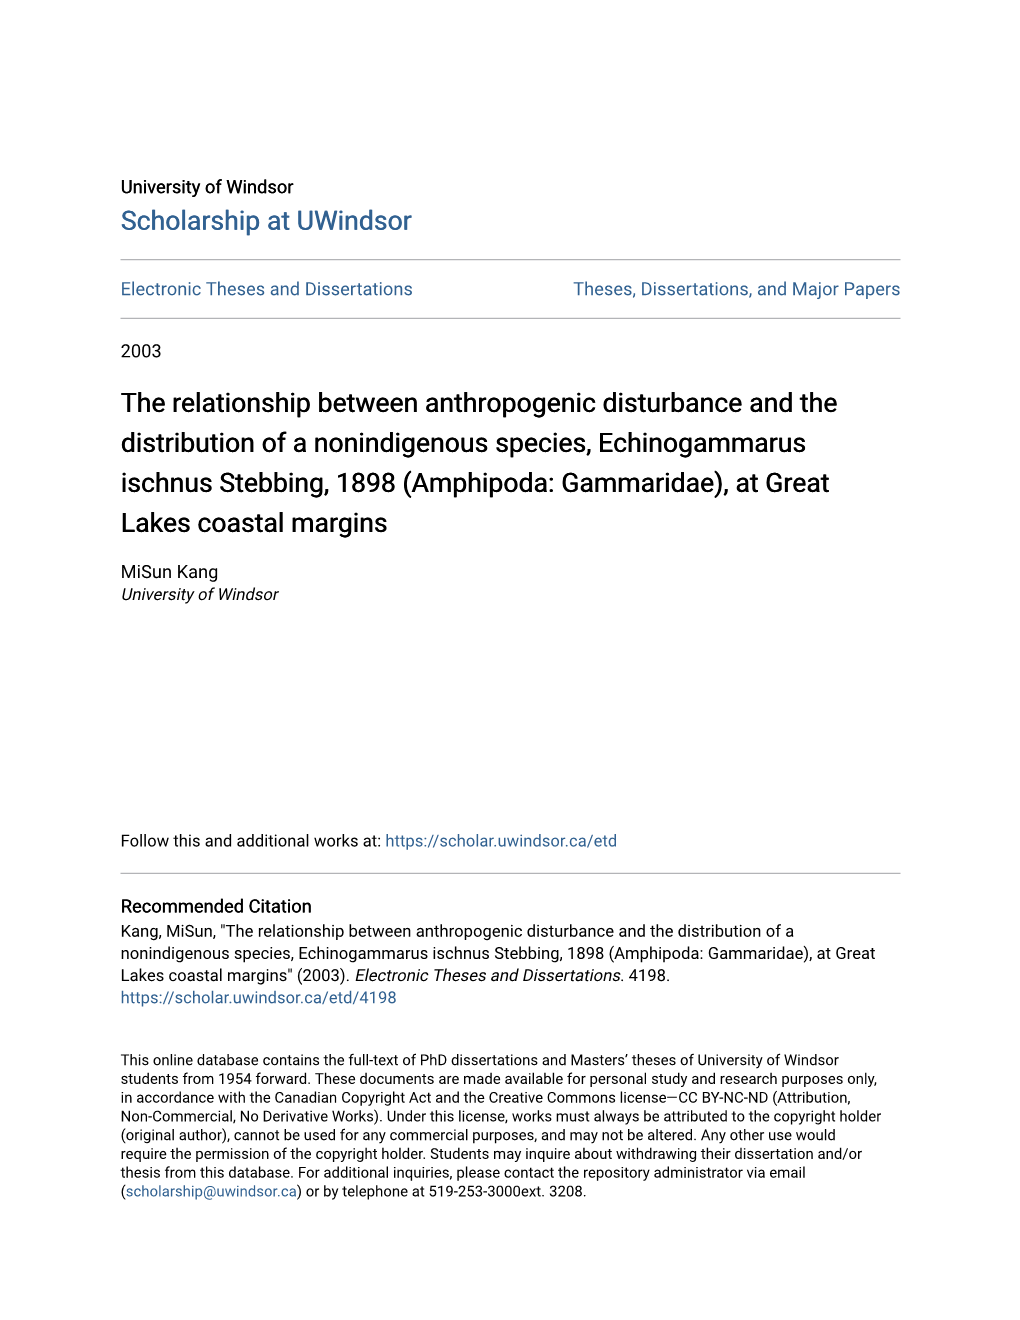 The Relationship Between Anthropogenic Disturbance and The